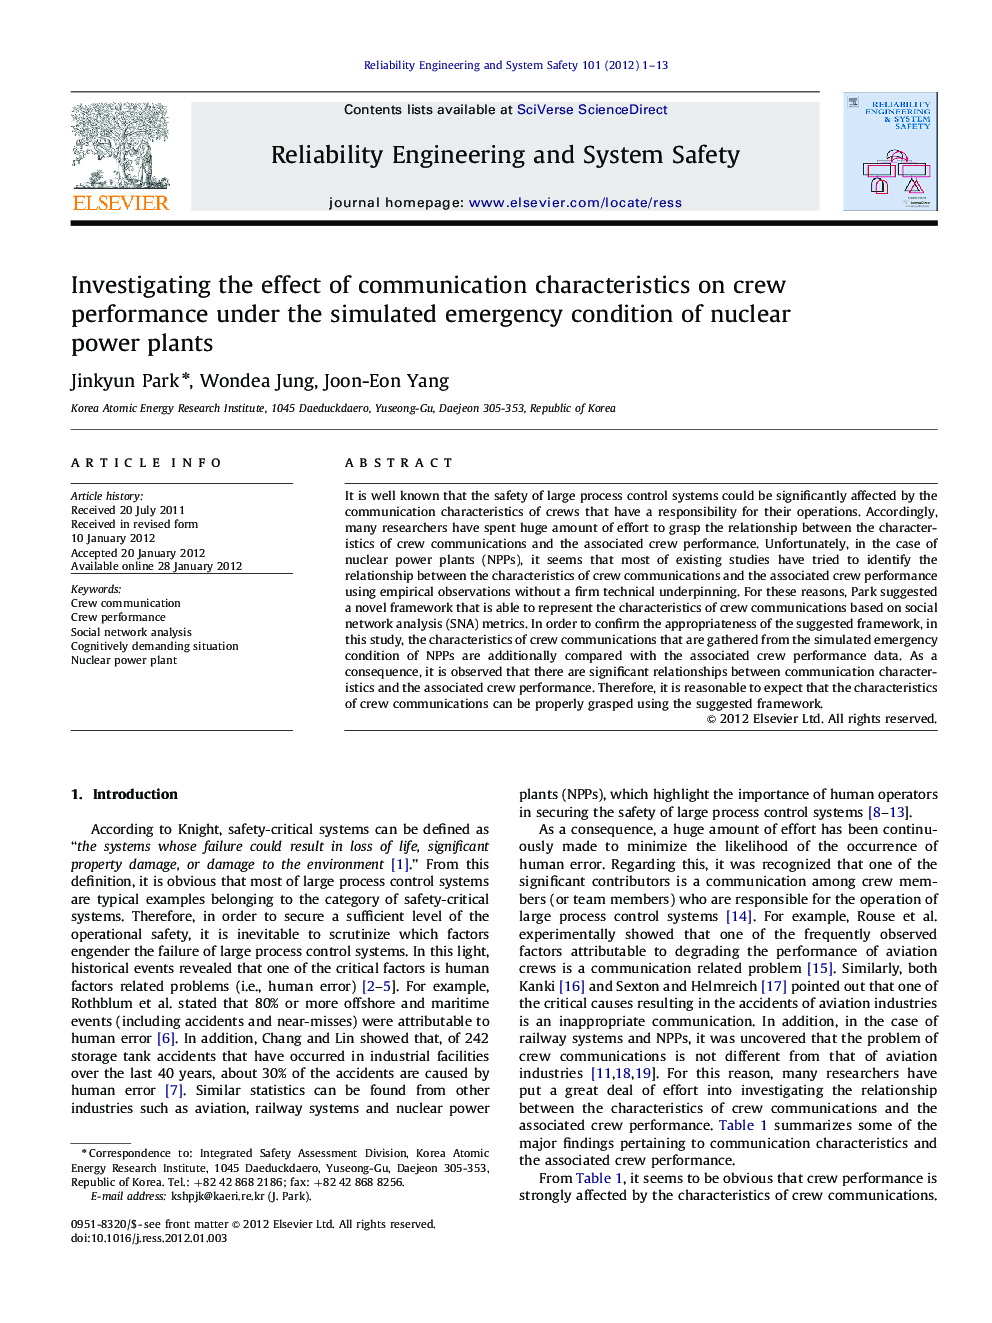 Investigating the effect of communication characteristics on crew performance under the simulated emergency condition of nuclear power plants